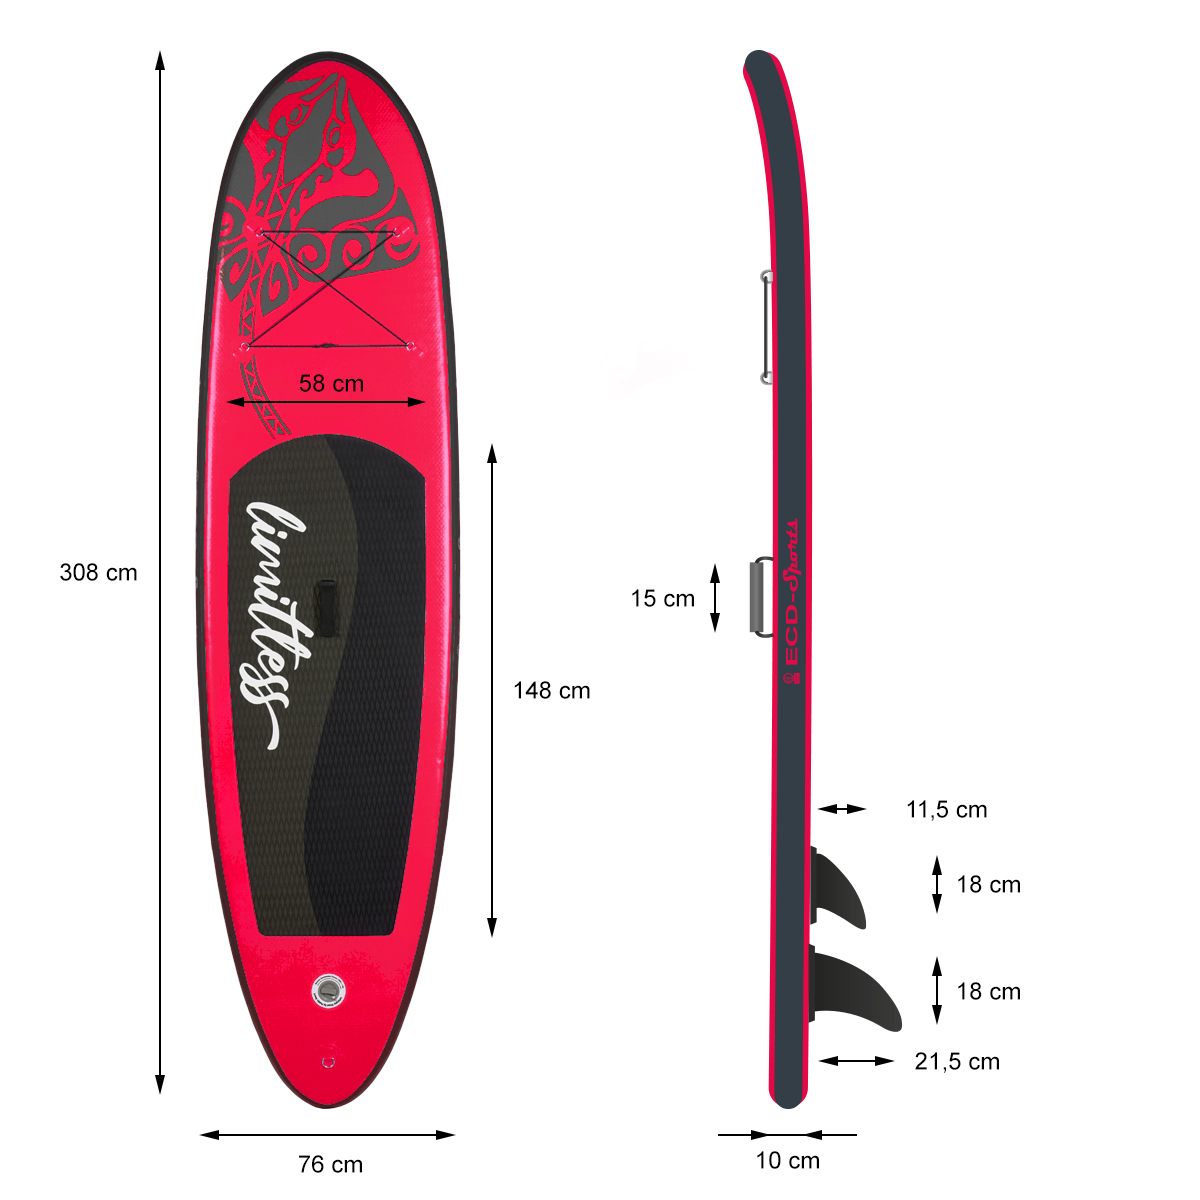 ECD-GERMANY Aufblasbares Stand Up Stand Paddle Red Board Paddle, Up